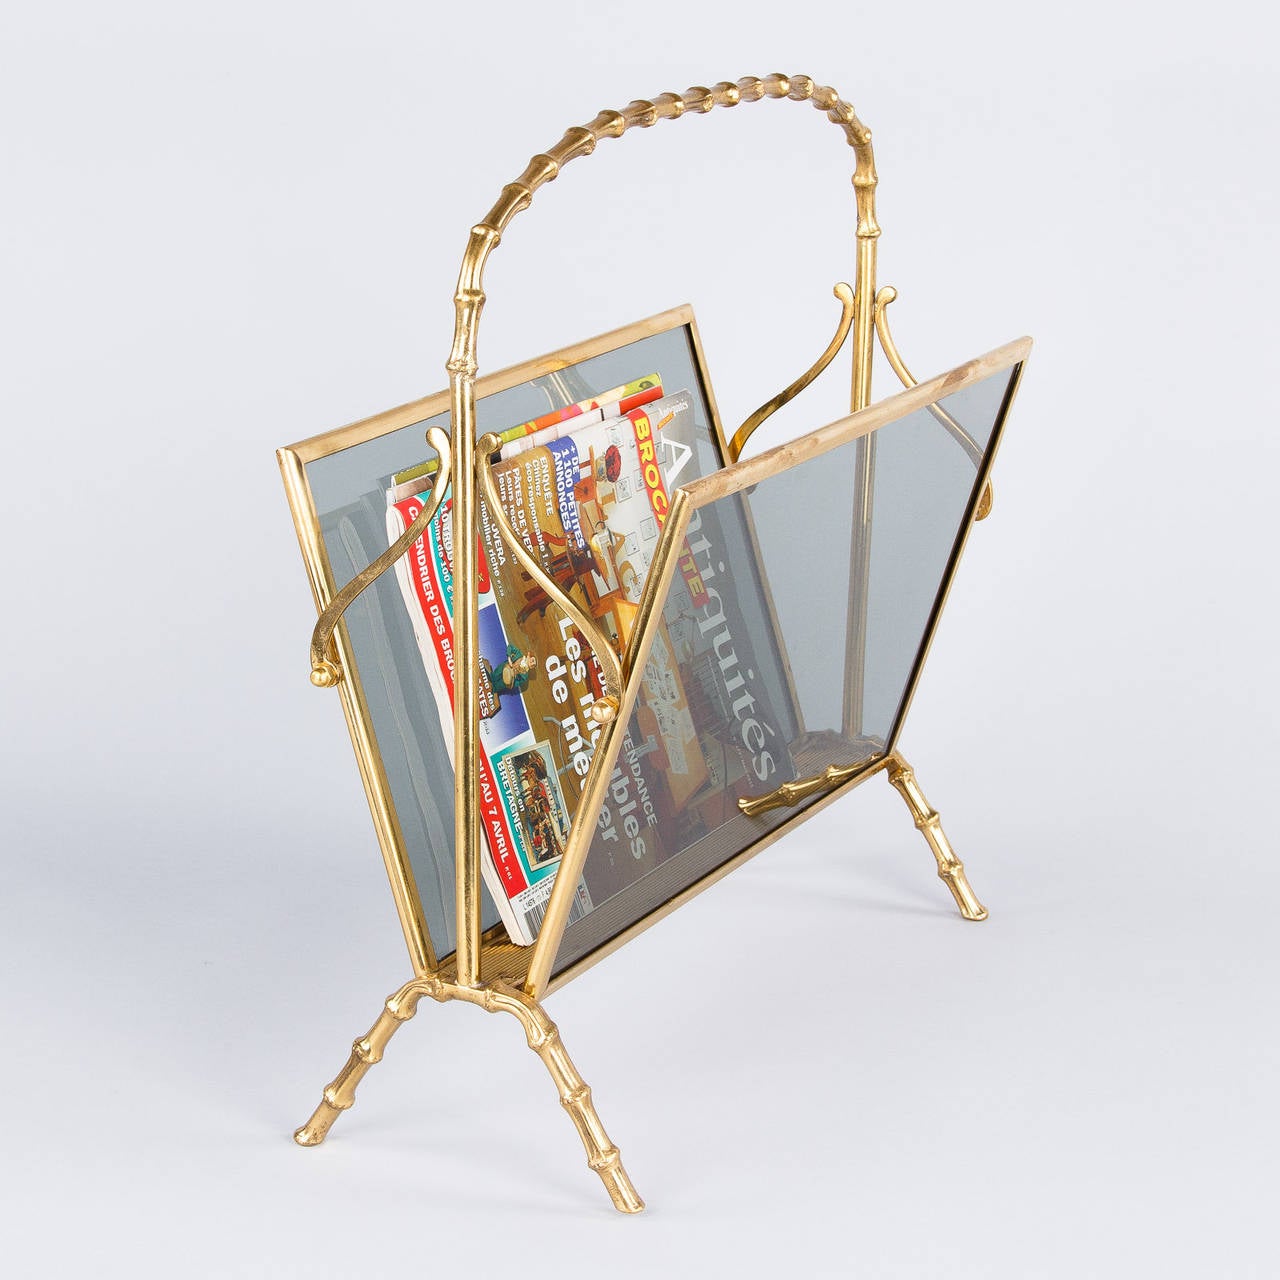 A Mid-Century magazine holder from Maison Baguès made of brass with smoked glass panels. The brass frame features scrolls motifs and bamboo style handle and feet.